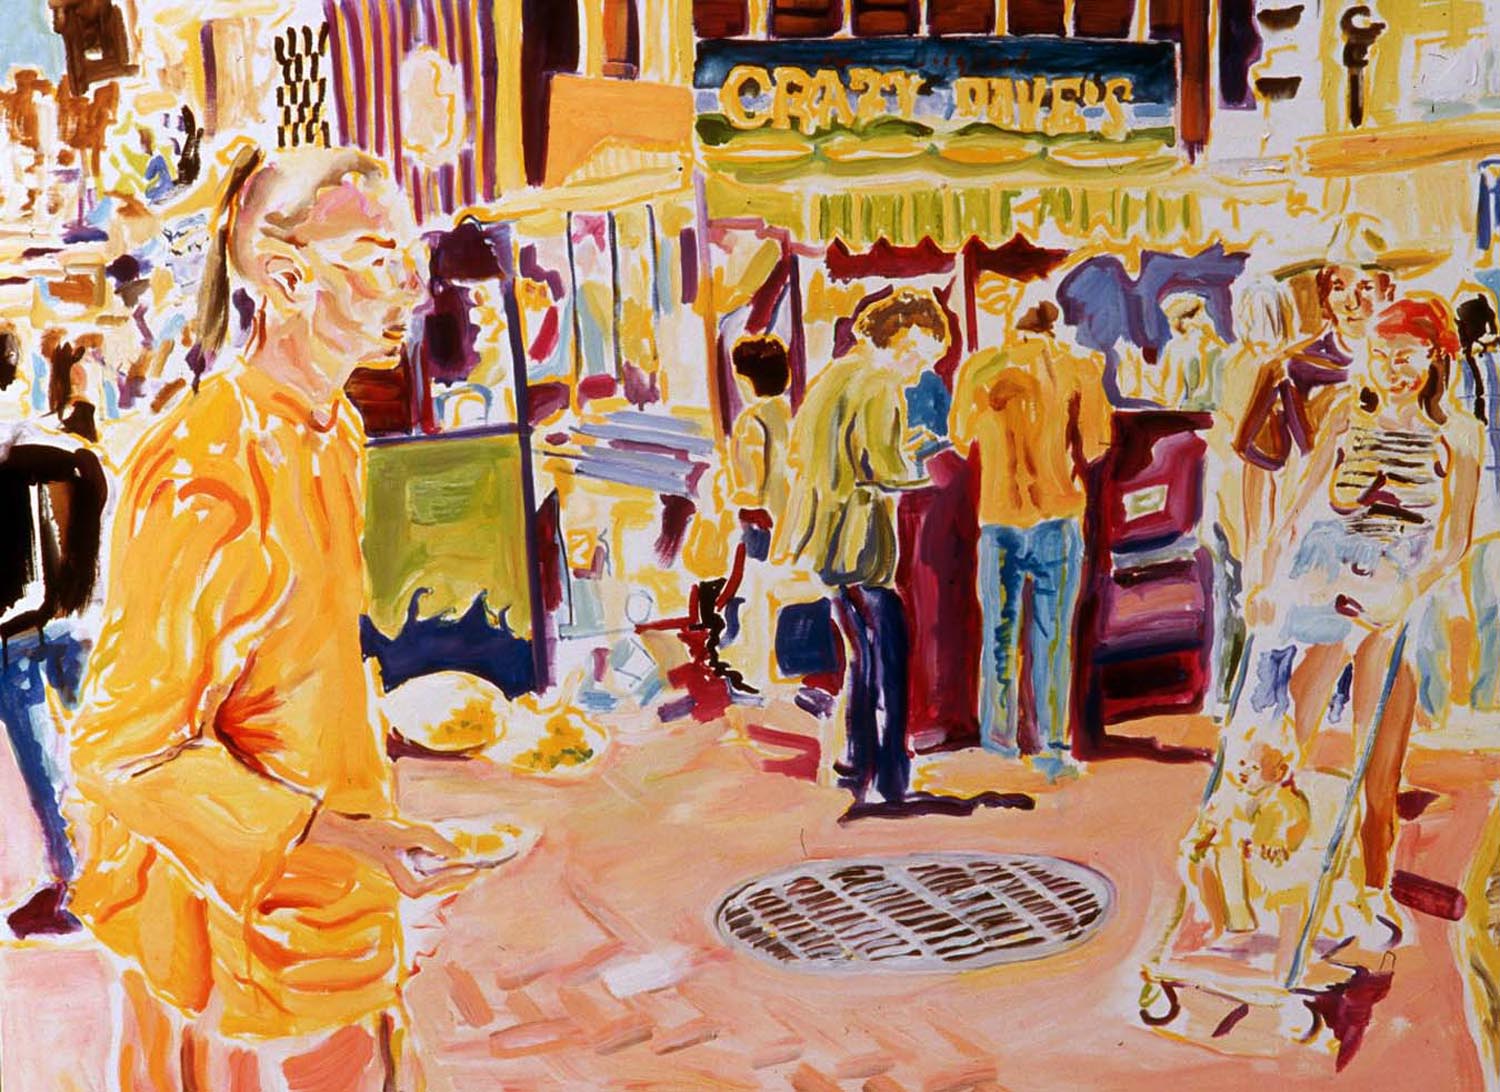 Crazy Dave’s, oil on canvas, 30” x 40”, 2005